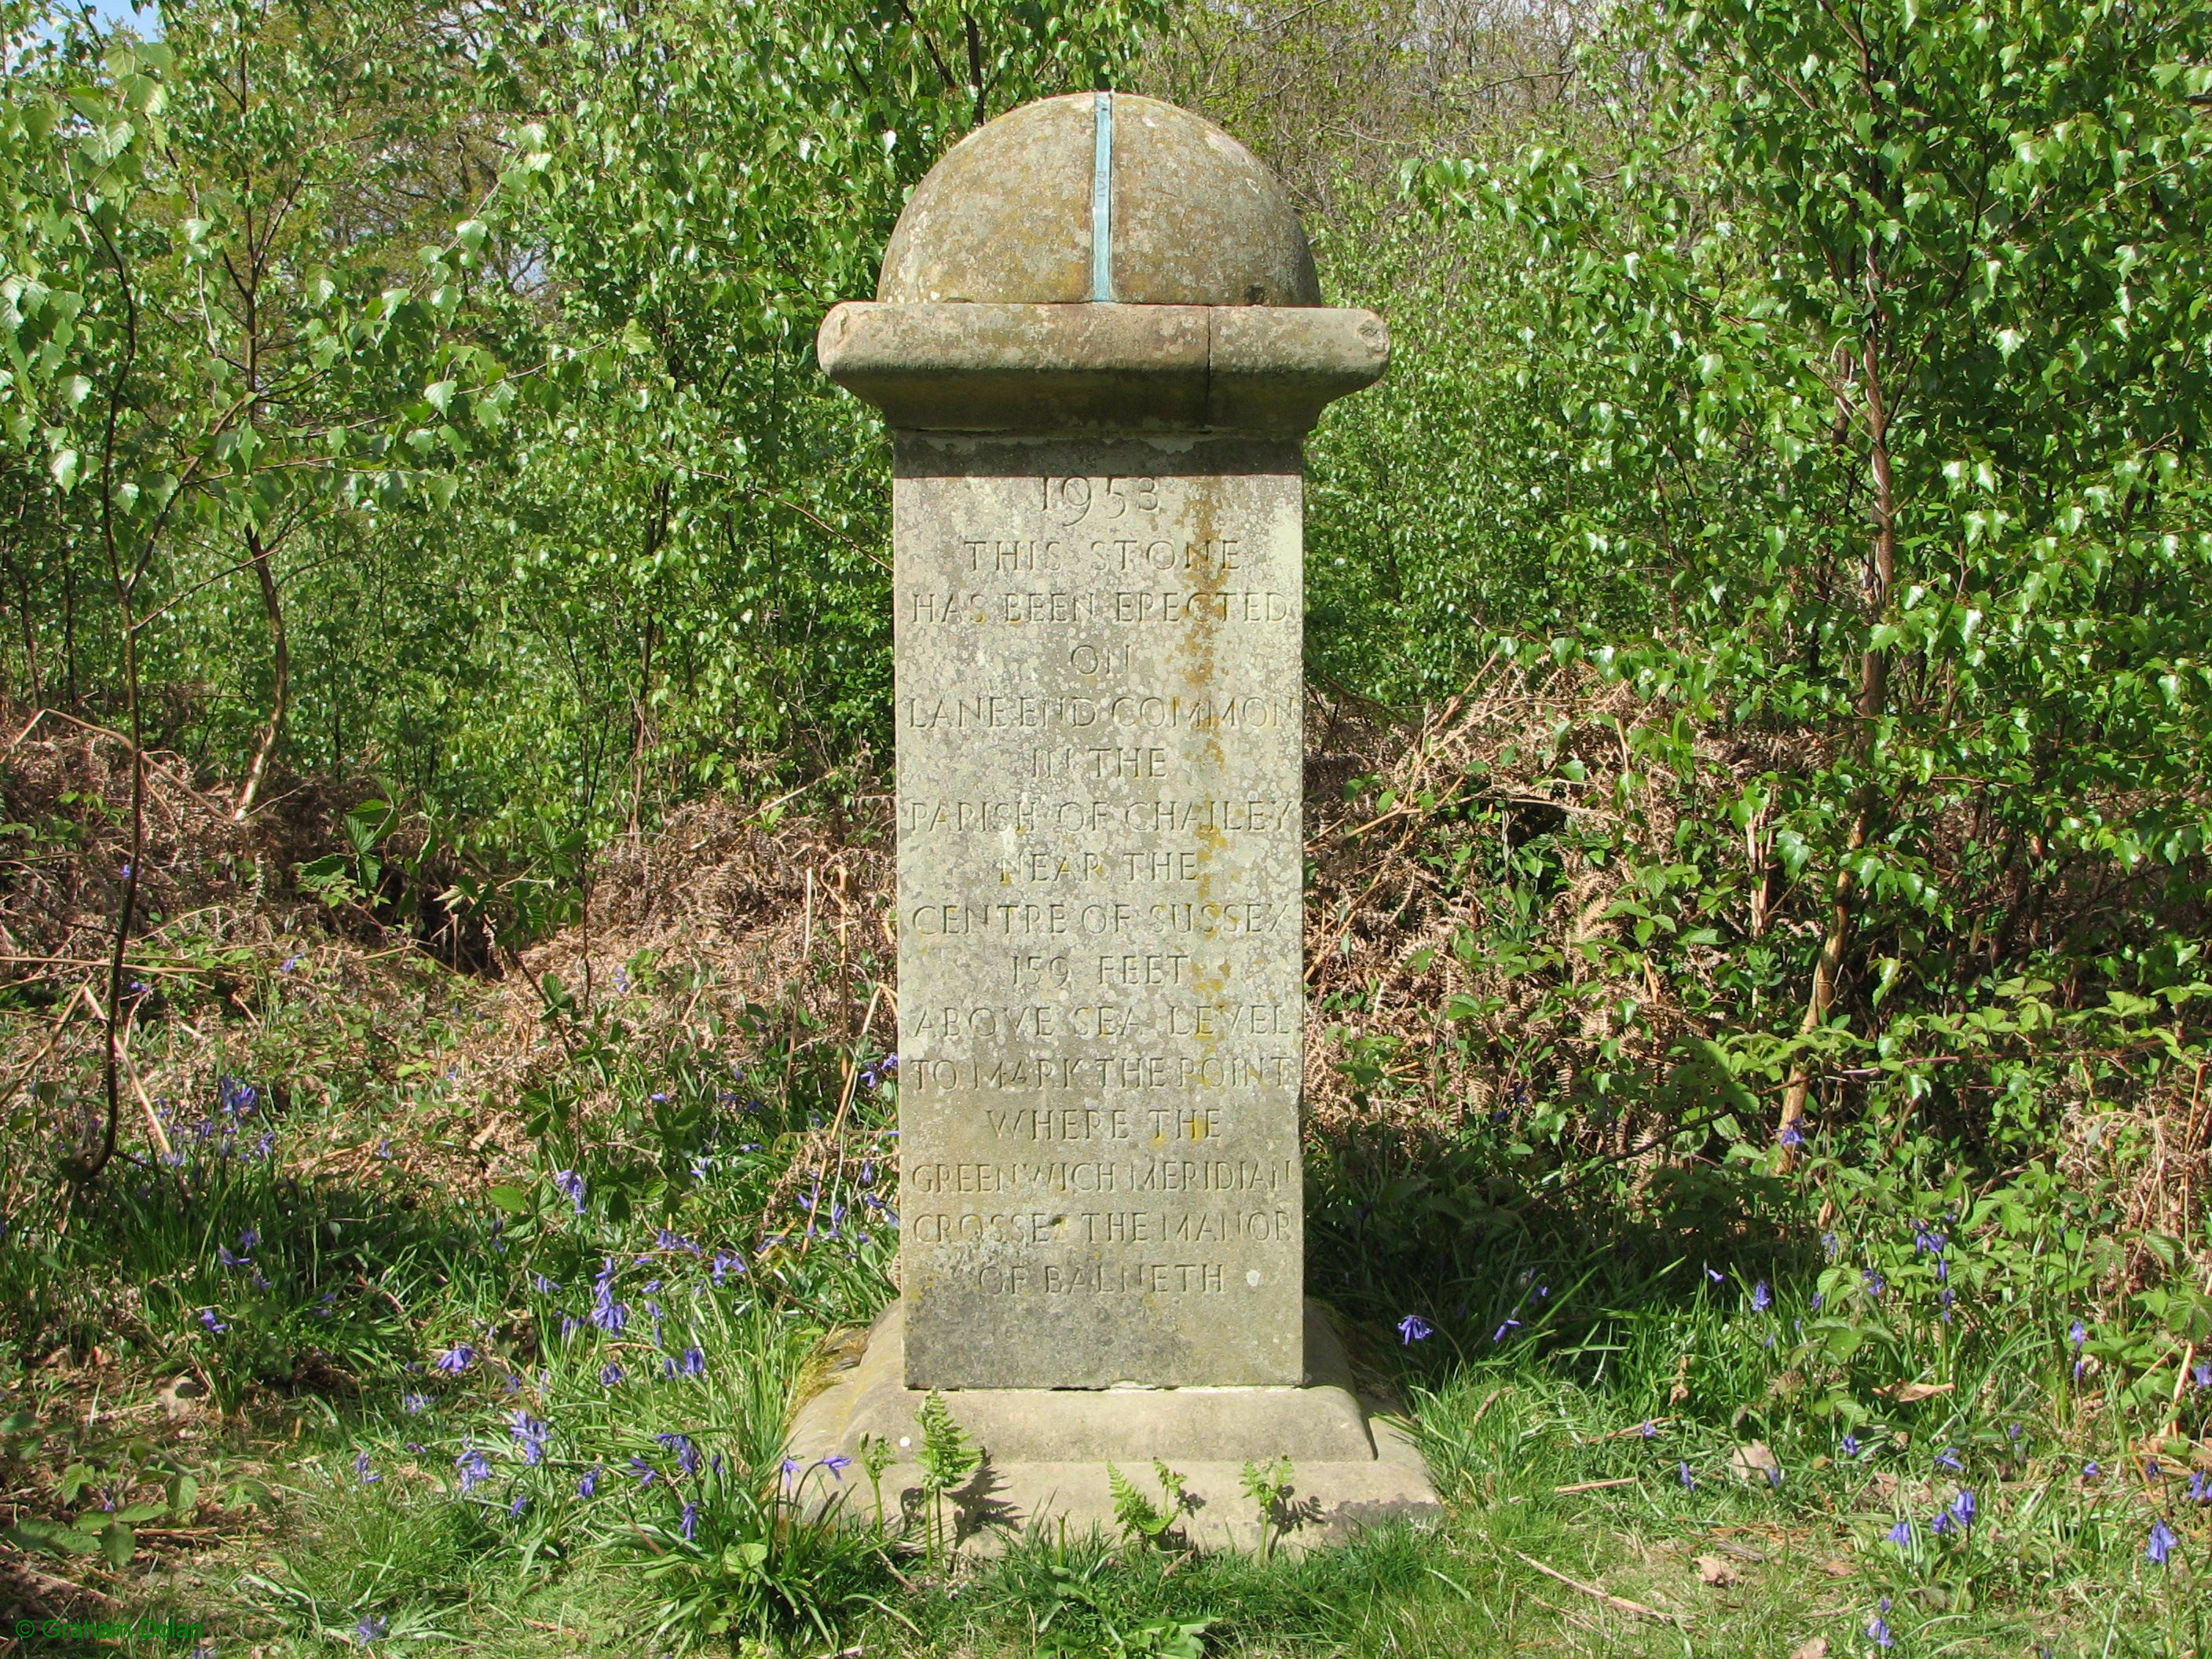 Greenwich Meridian Marker; England; East Sussex; Chailey